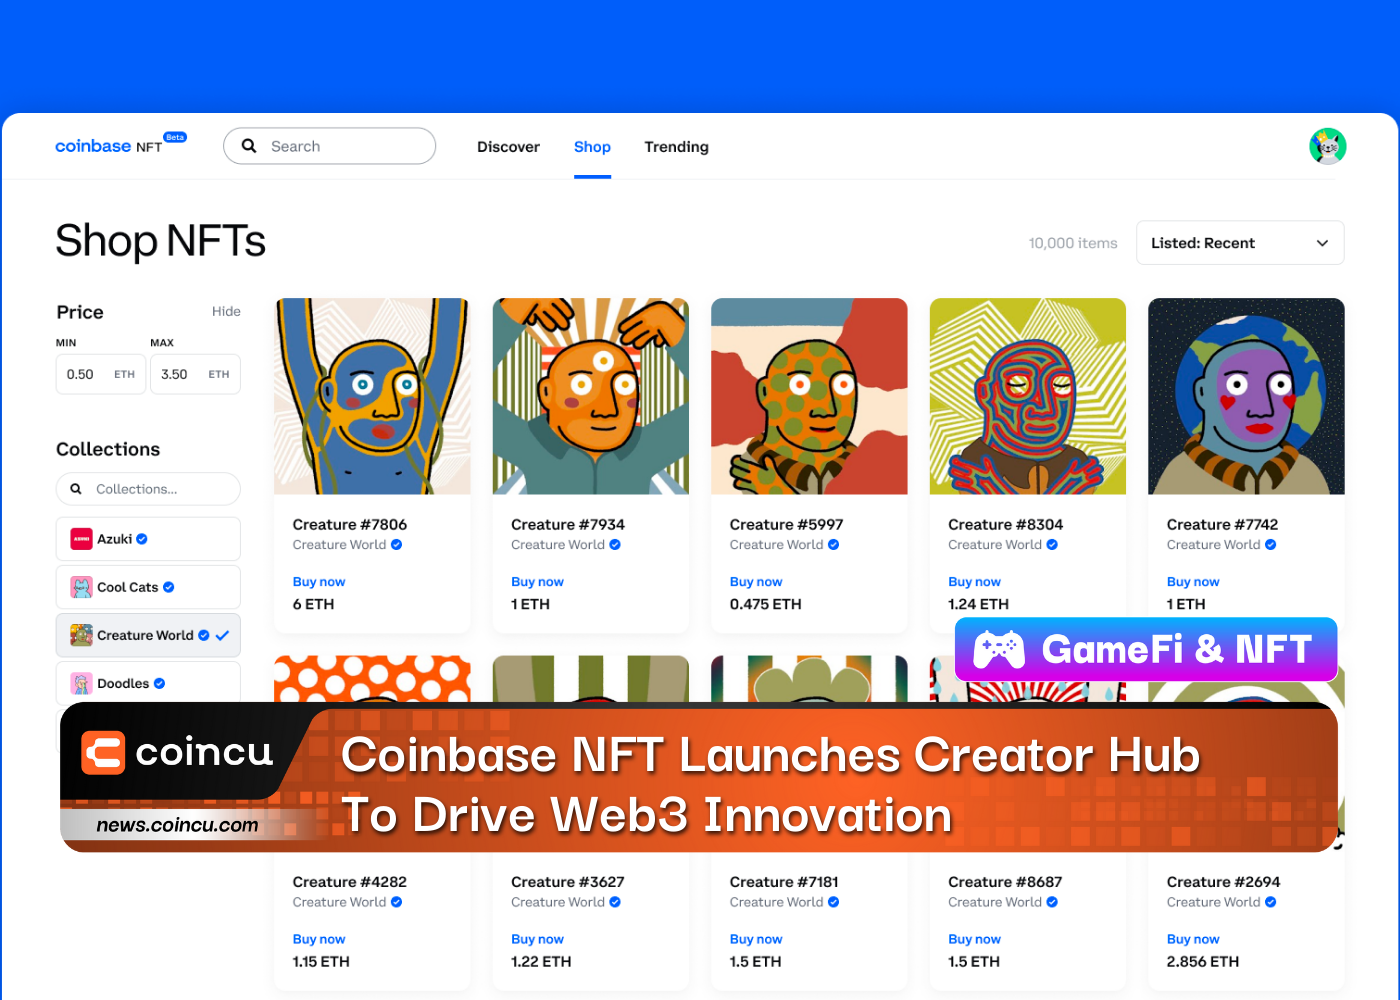 Coinbase NFT Launches Creator Hub To Drive Web3 Innovation